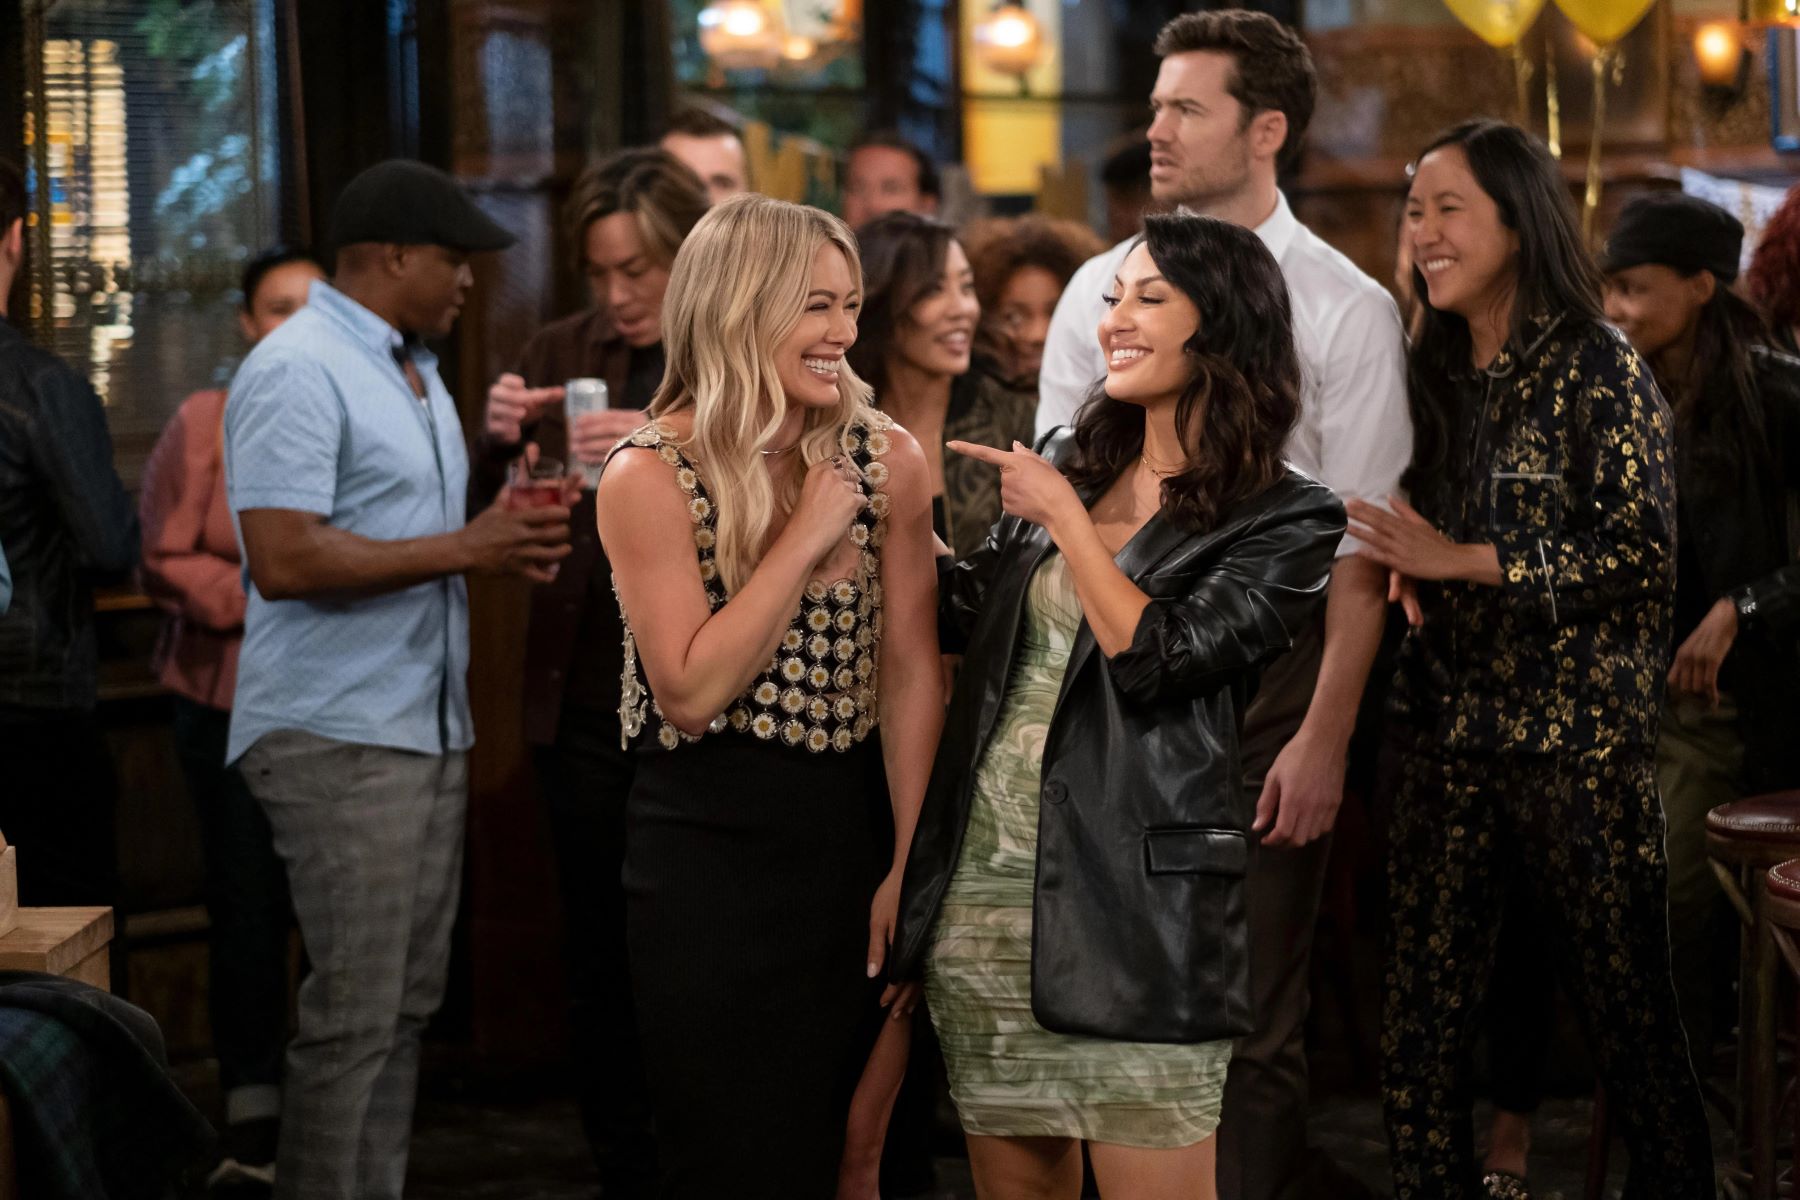 Hilary Duff and Francia Raisa, in character as Sophie and Valentina in 'How I Met Your Father' Season 2, share a scene at the bar. Sophie wears a daisy crop top over a black dress. Valentina wears a black leather jacket over a green and white dress.